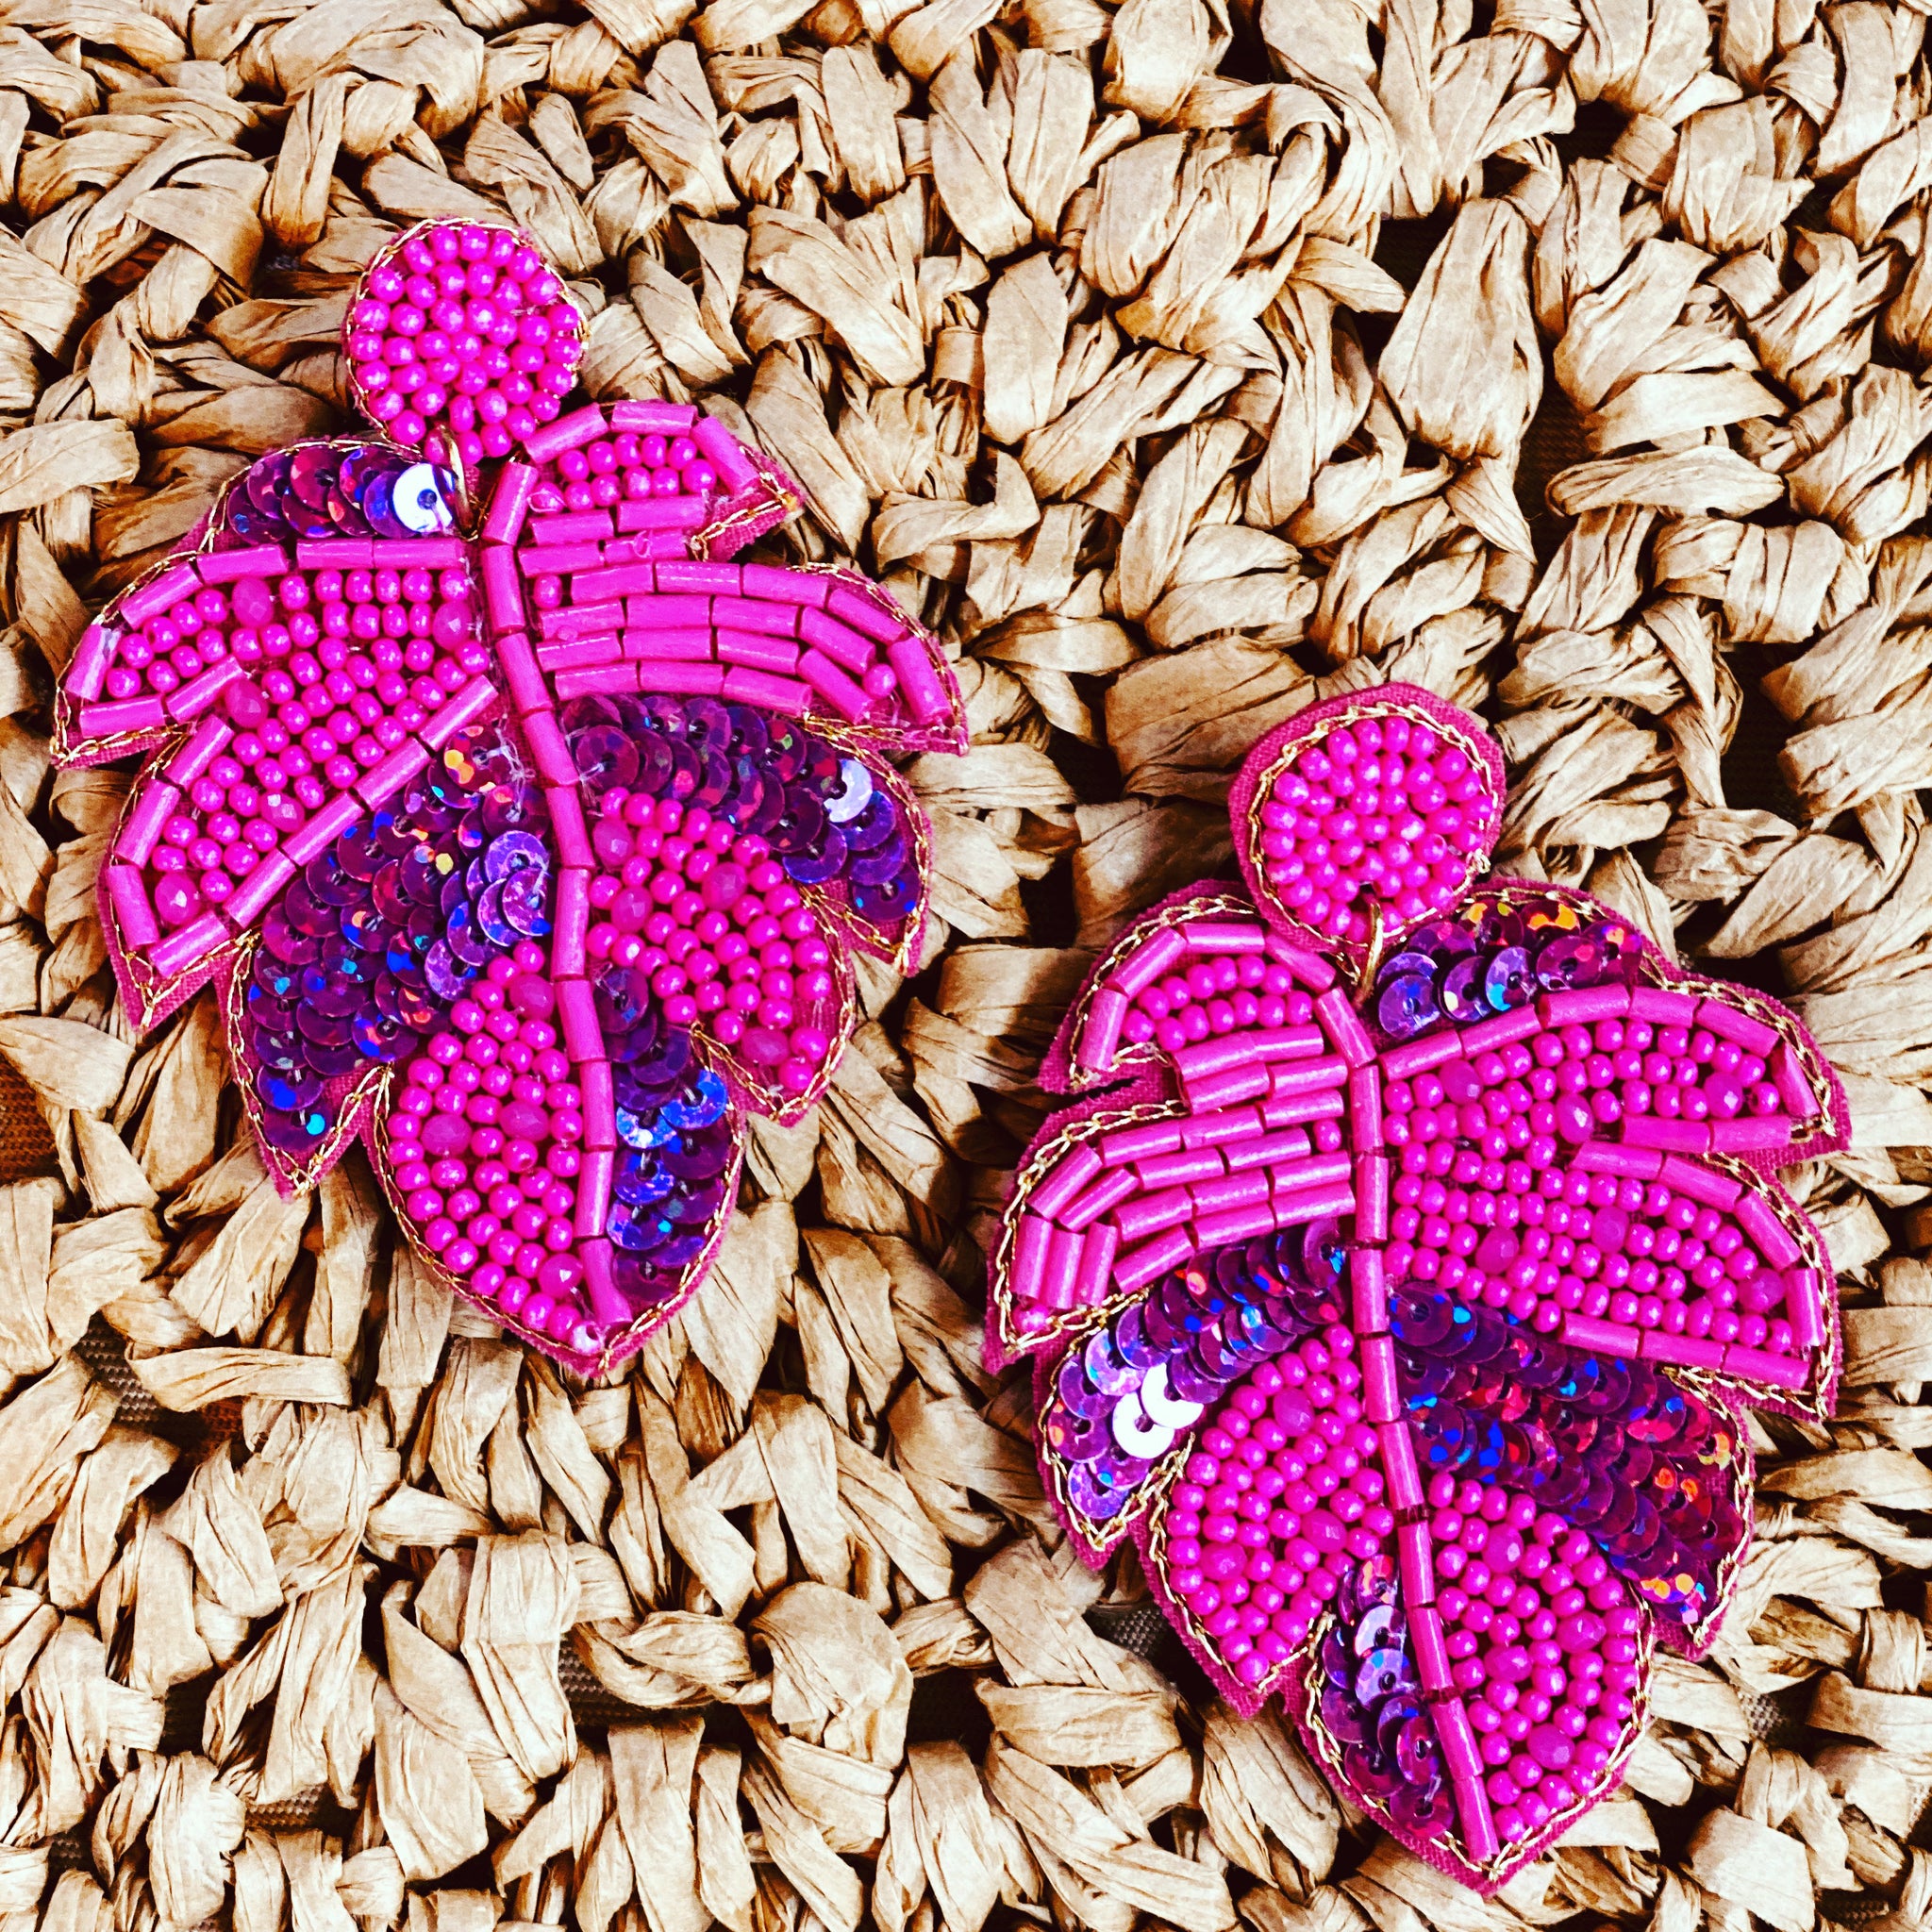 Sequined Palm Frond Earrings